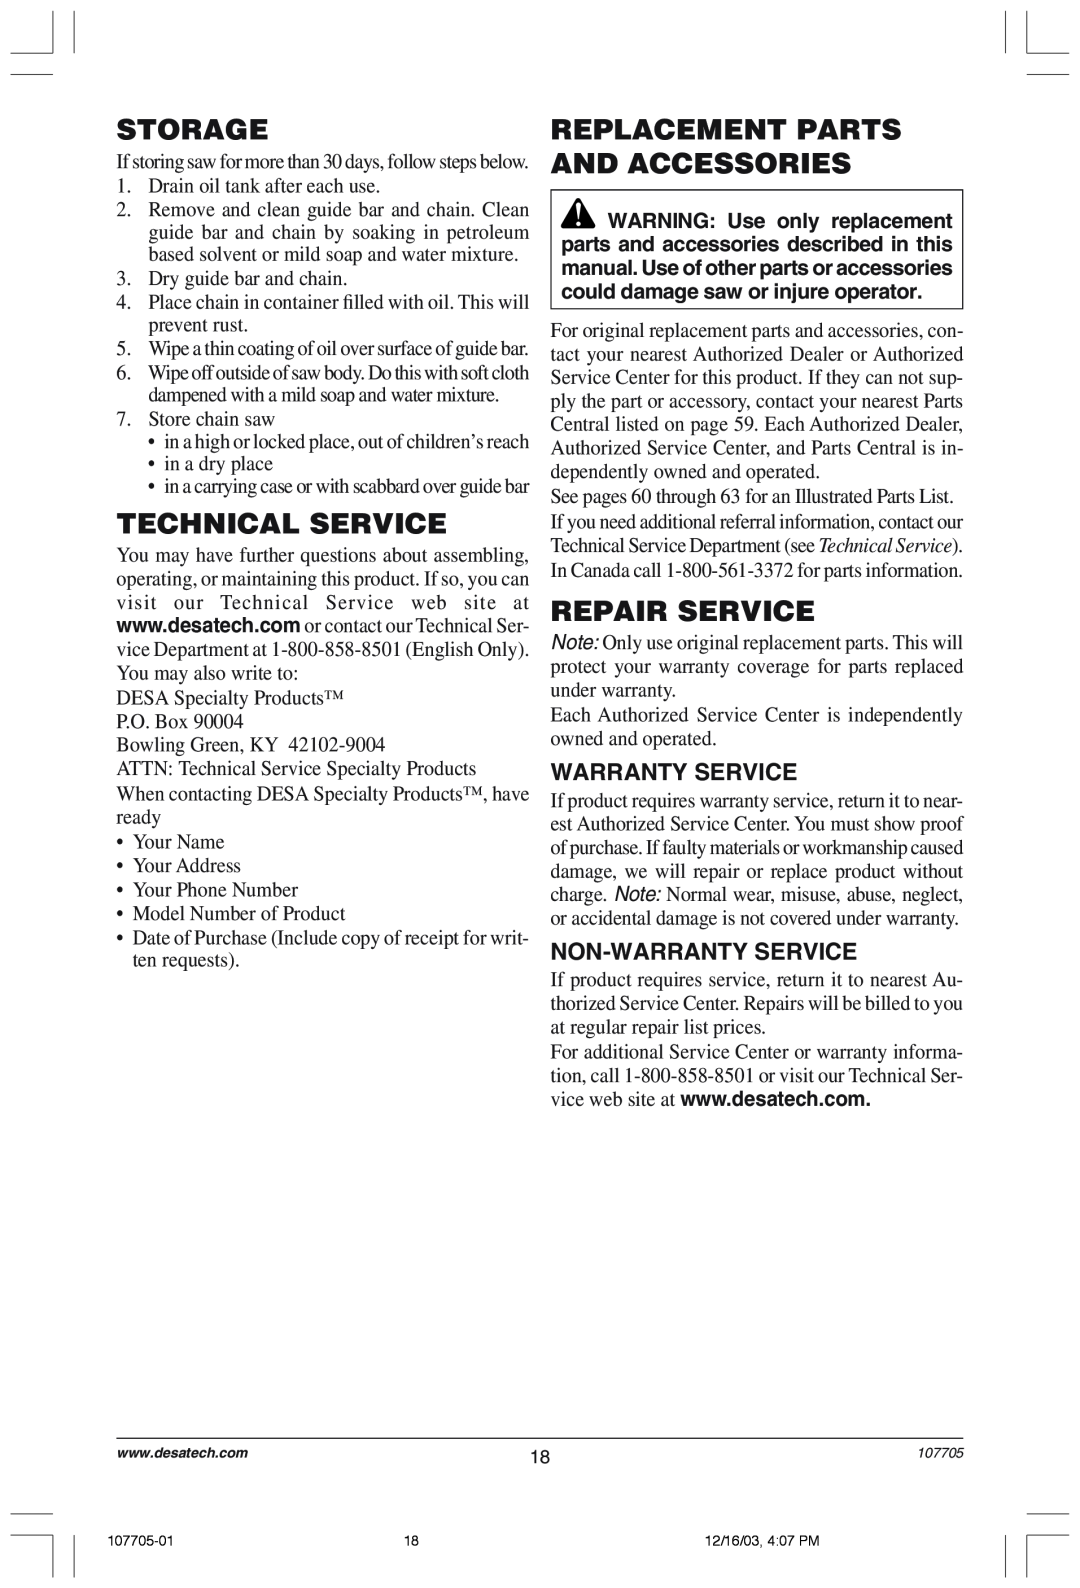 Desa 107624-01 owner manual Storage, Technical Service, Replacement Parts And Accessories, Repair Service, Warranty Service 